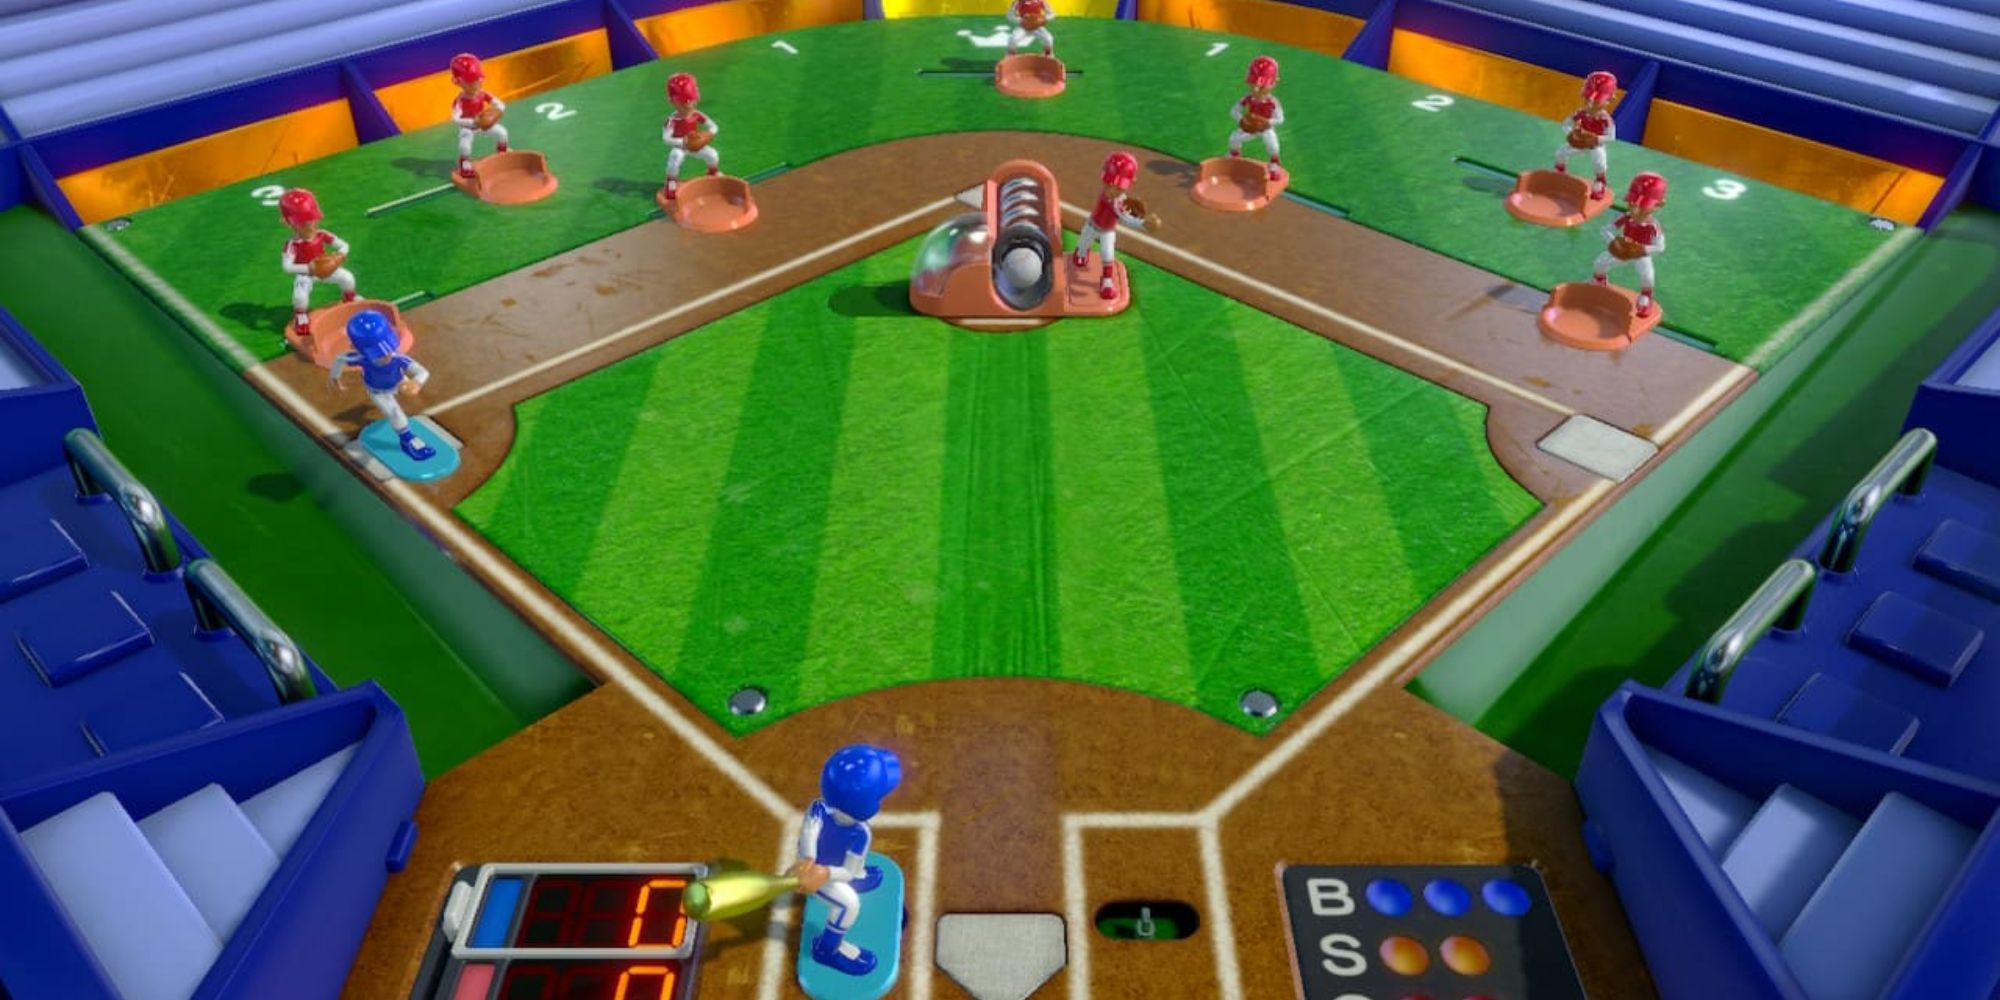 Clubhouse Games a plastic toy set mimicking Baseball with blue and red players scattered across the set